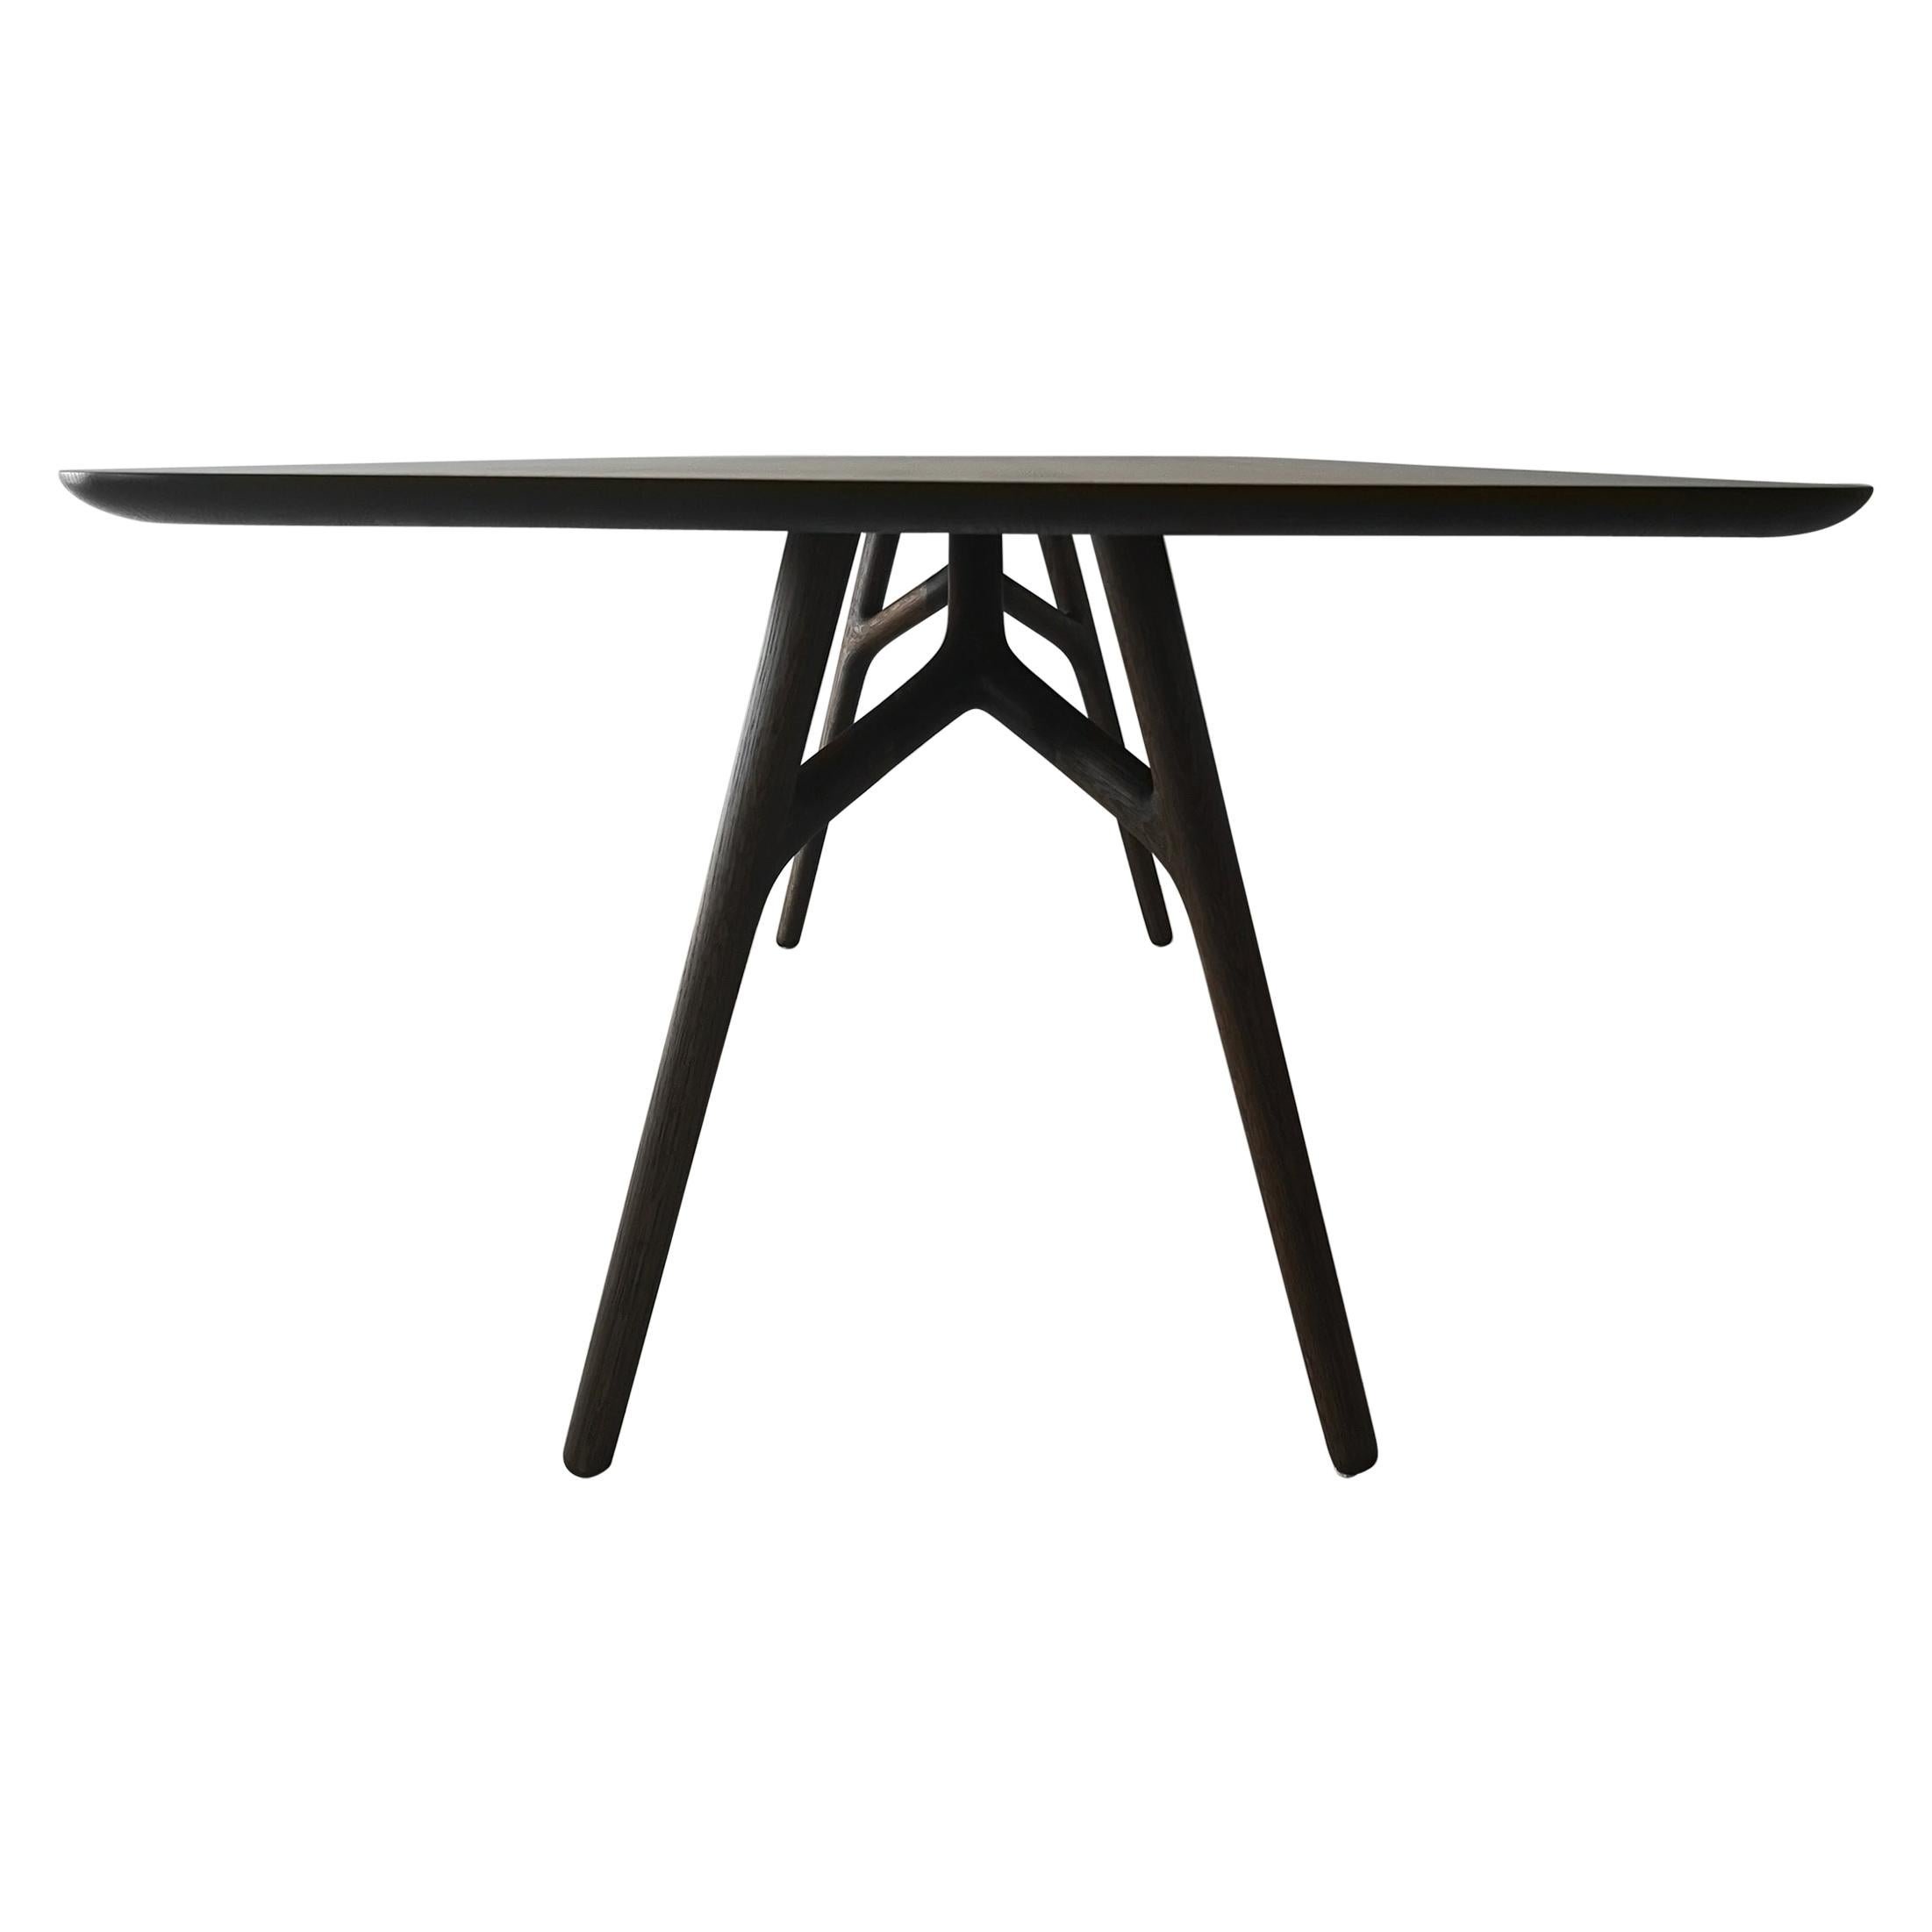 Furcula Modern Solid Wood Dining Table by Izm Design